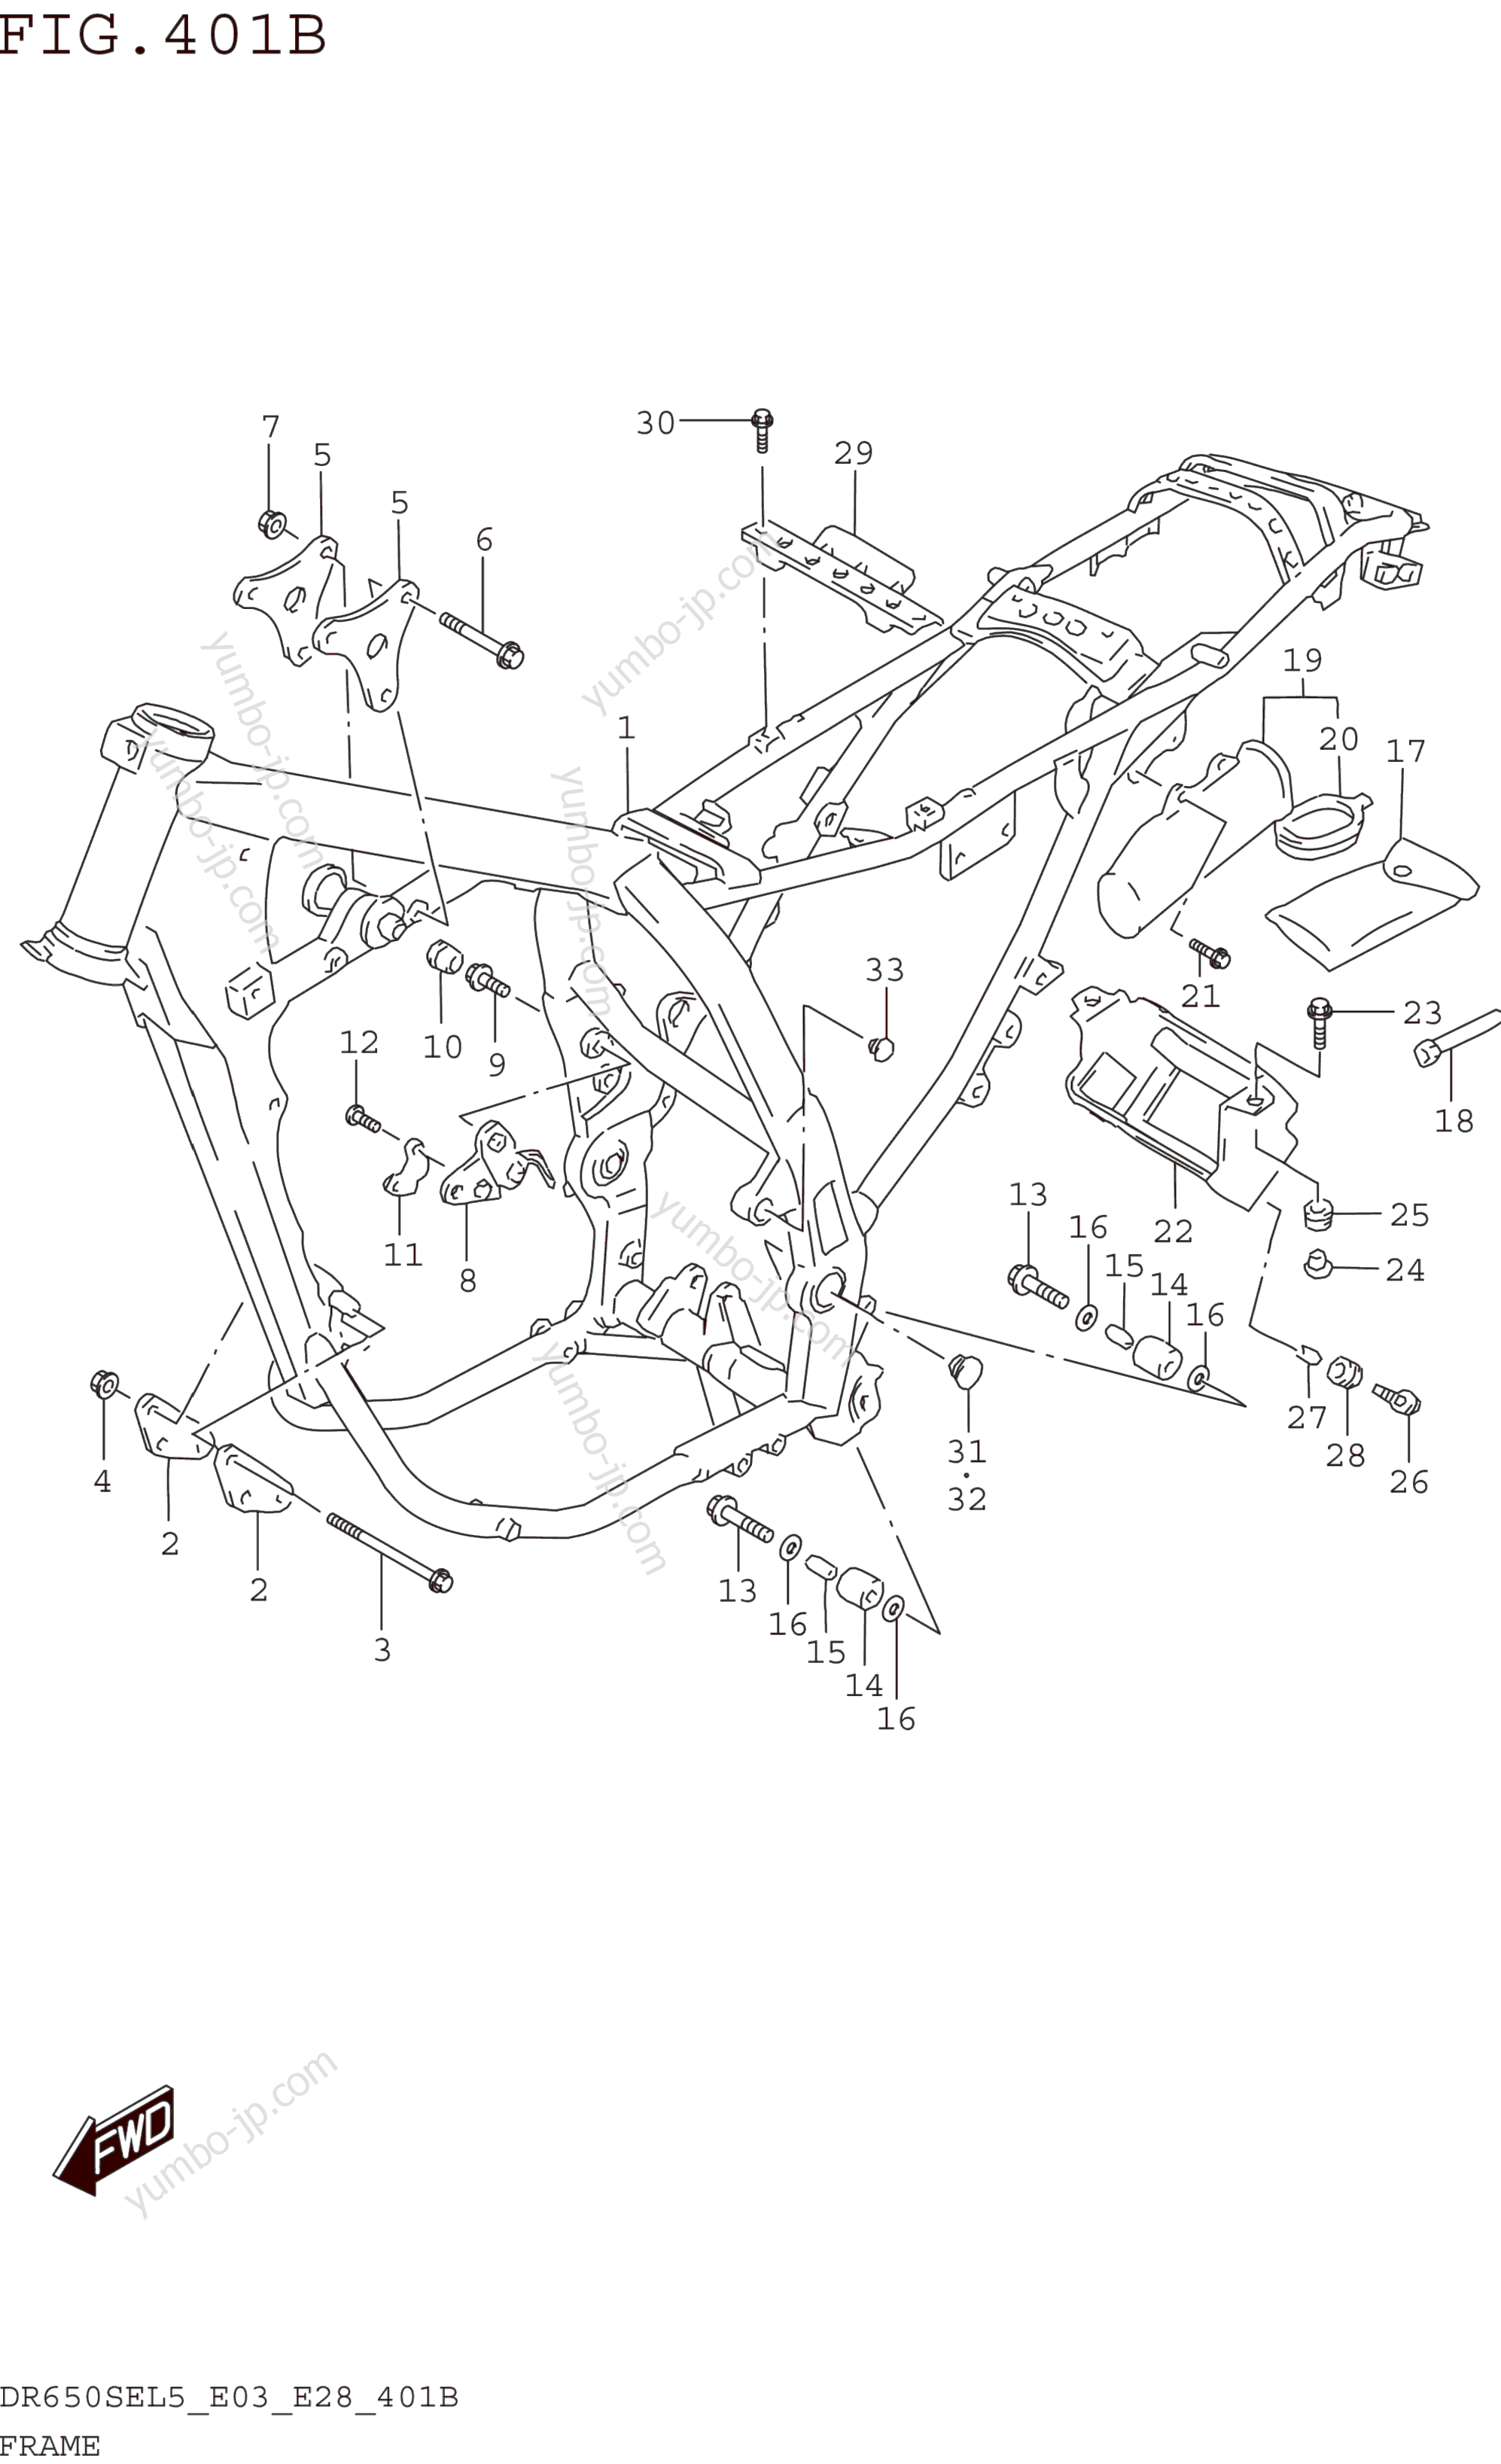 FRAME (DR650SEL5 E28) for motorcycles SUZUKI DR650SE 2015 year